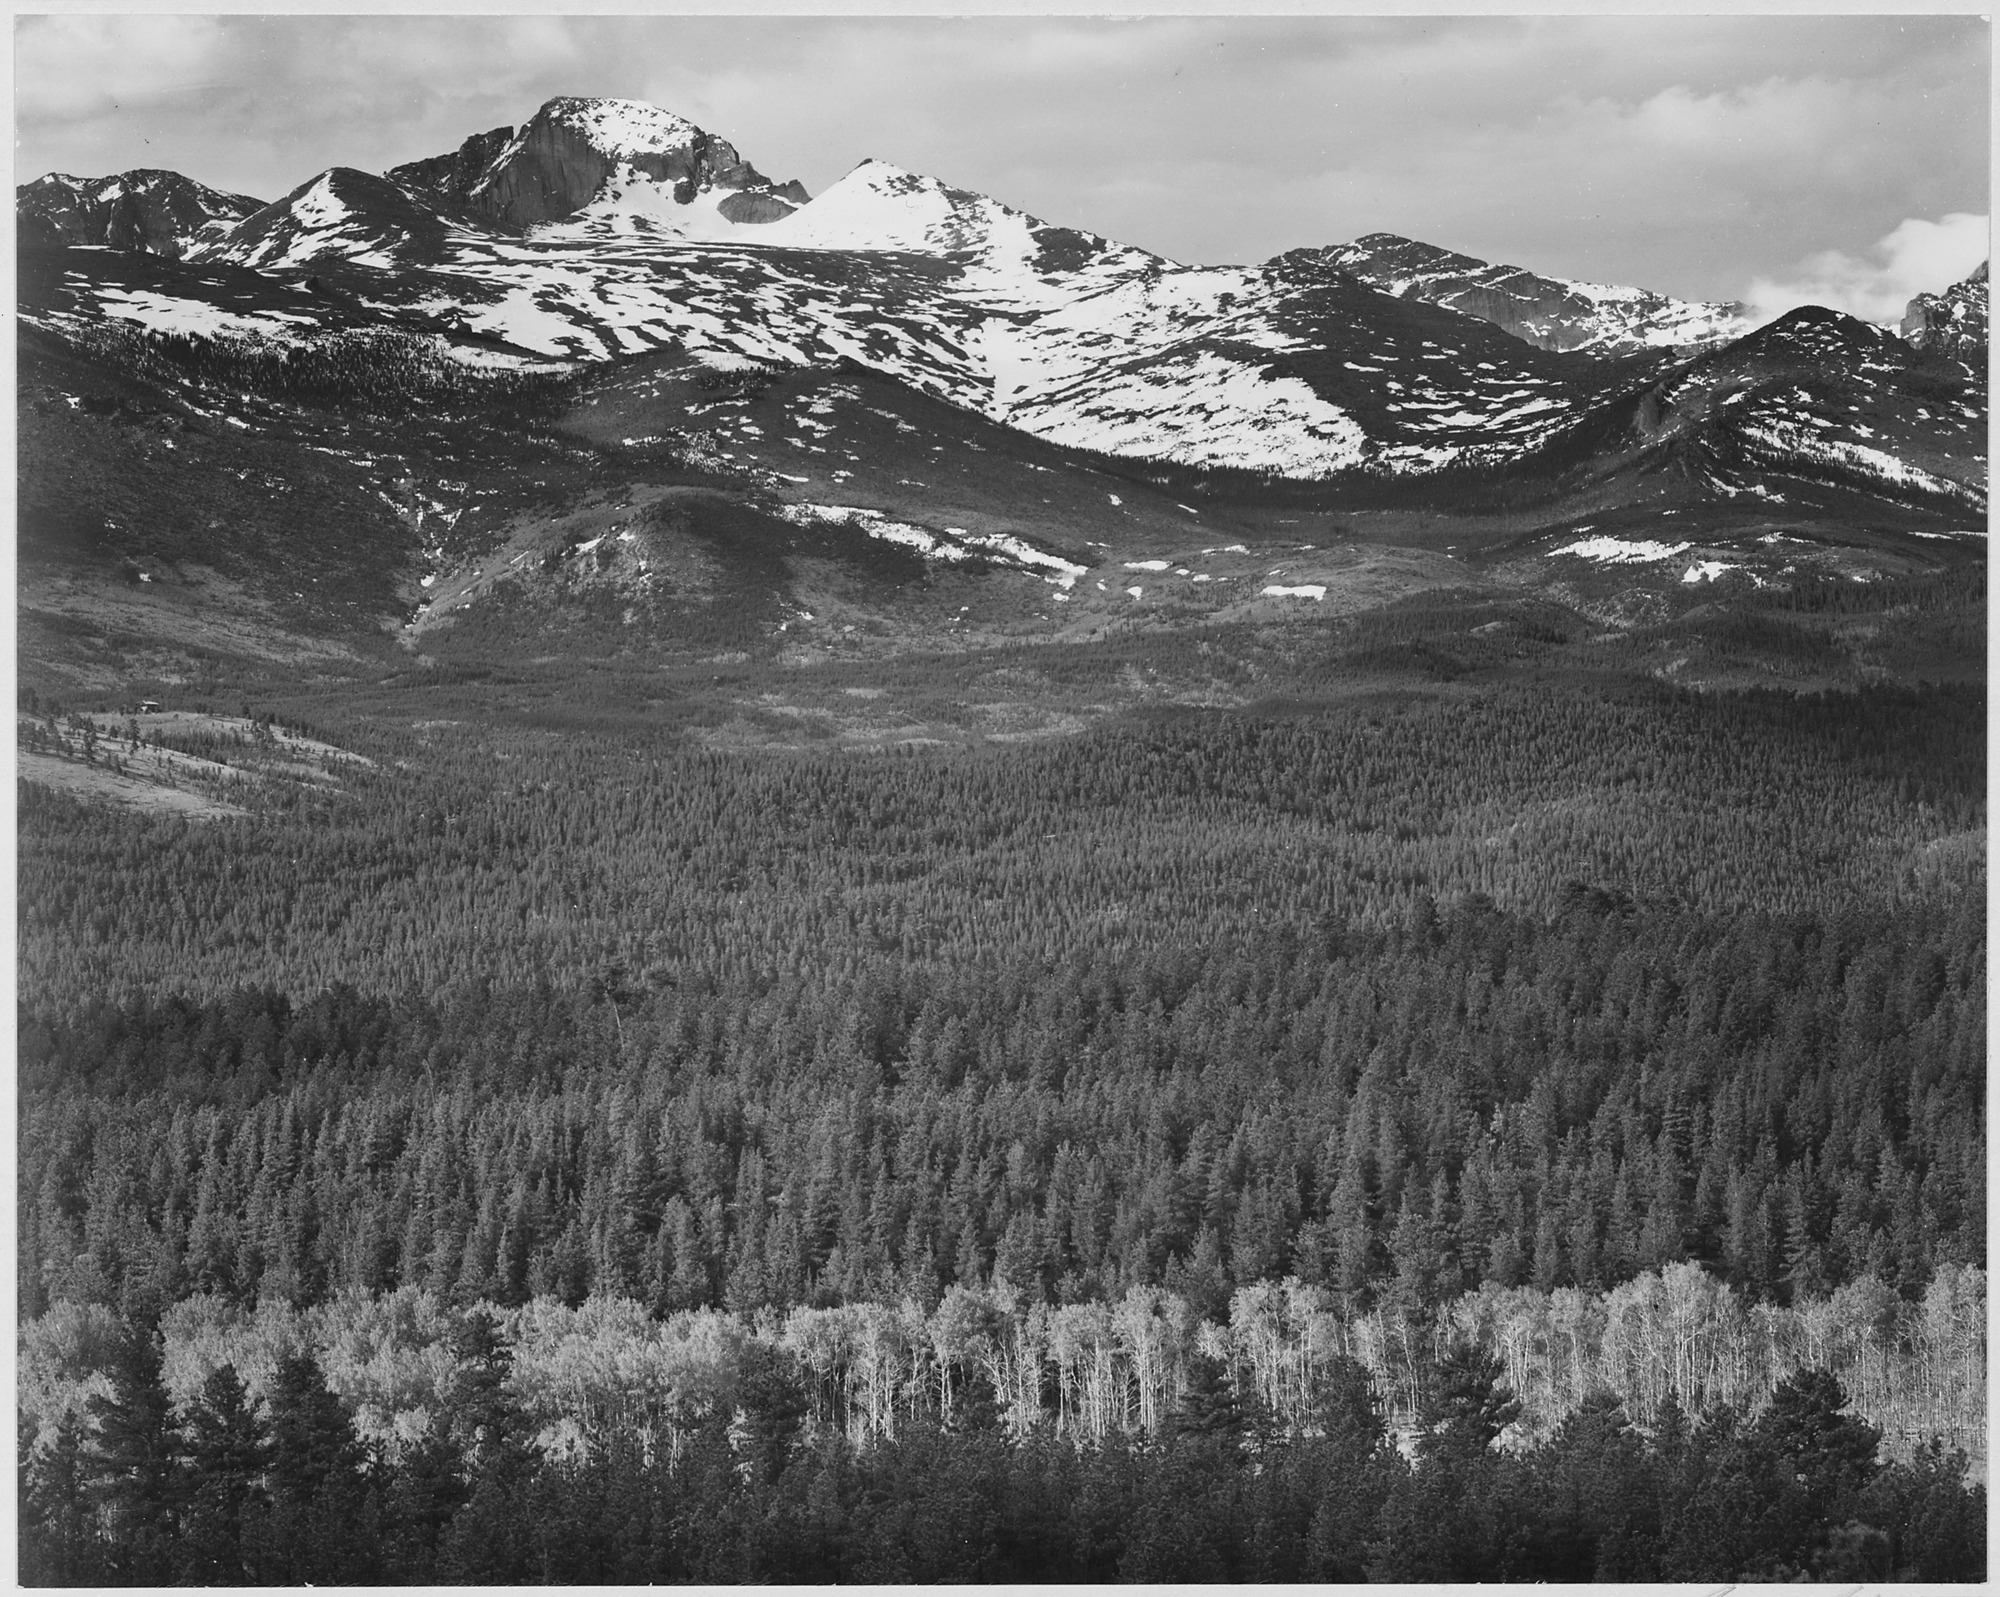 View of trees and snow-capped mountains, 